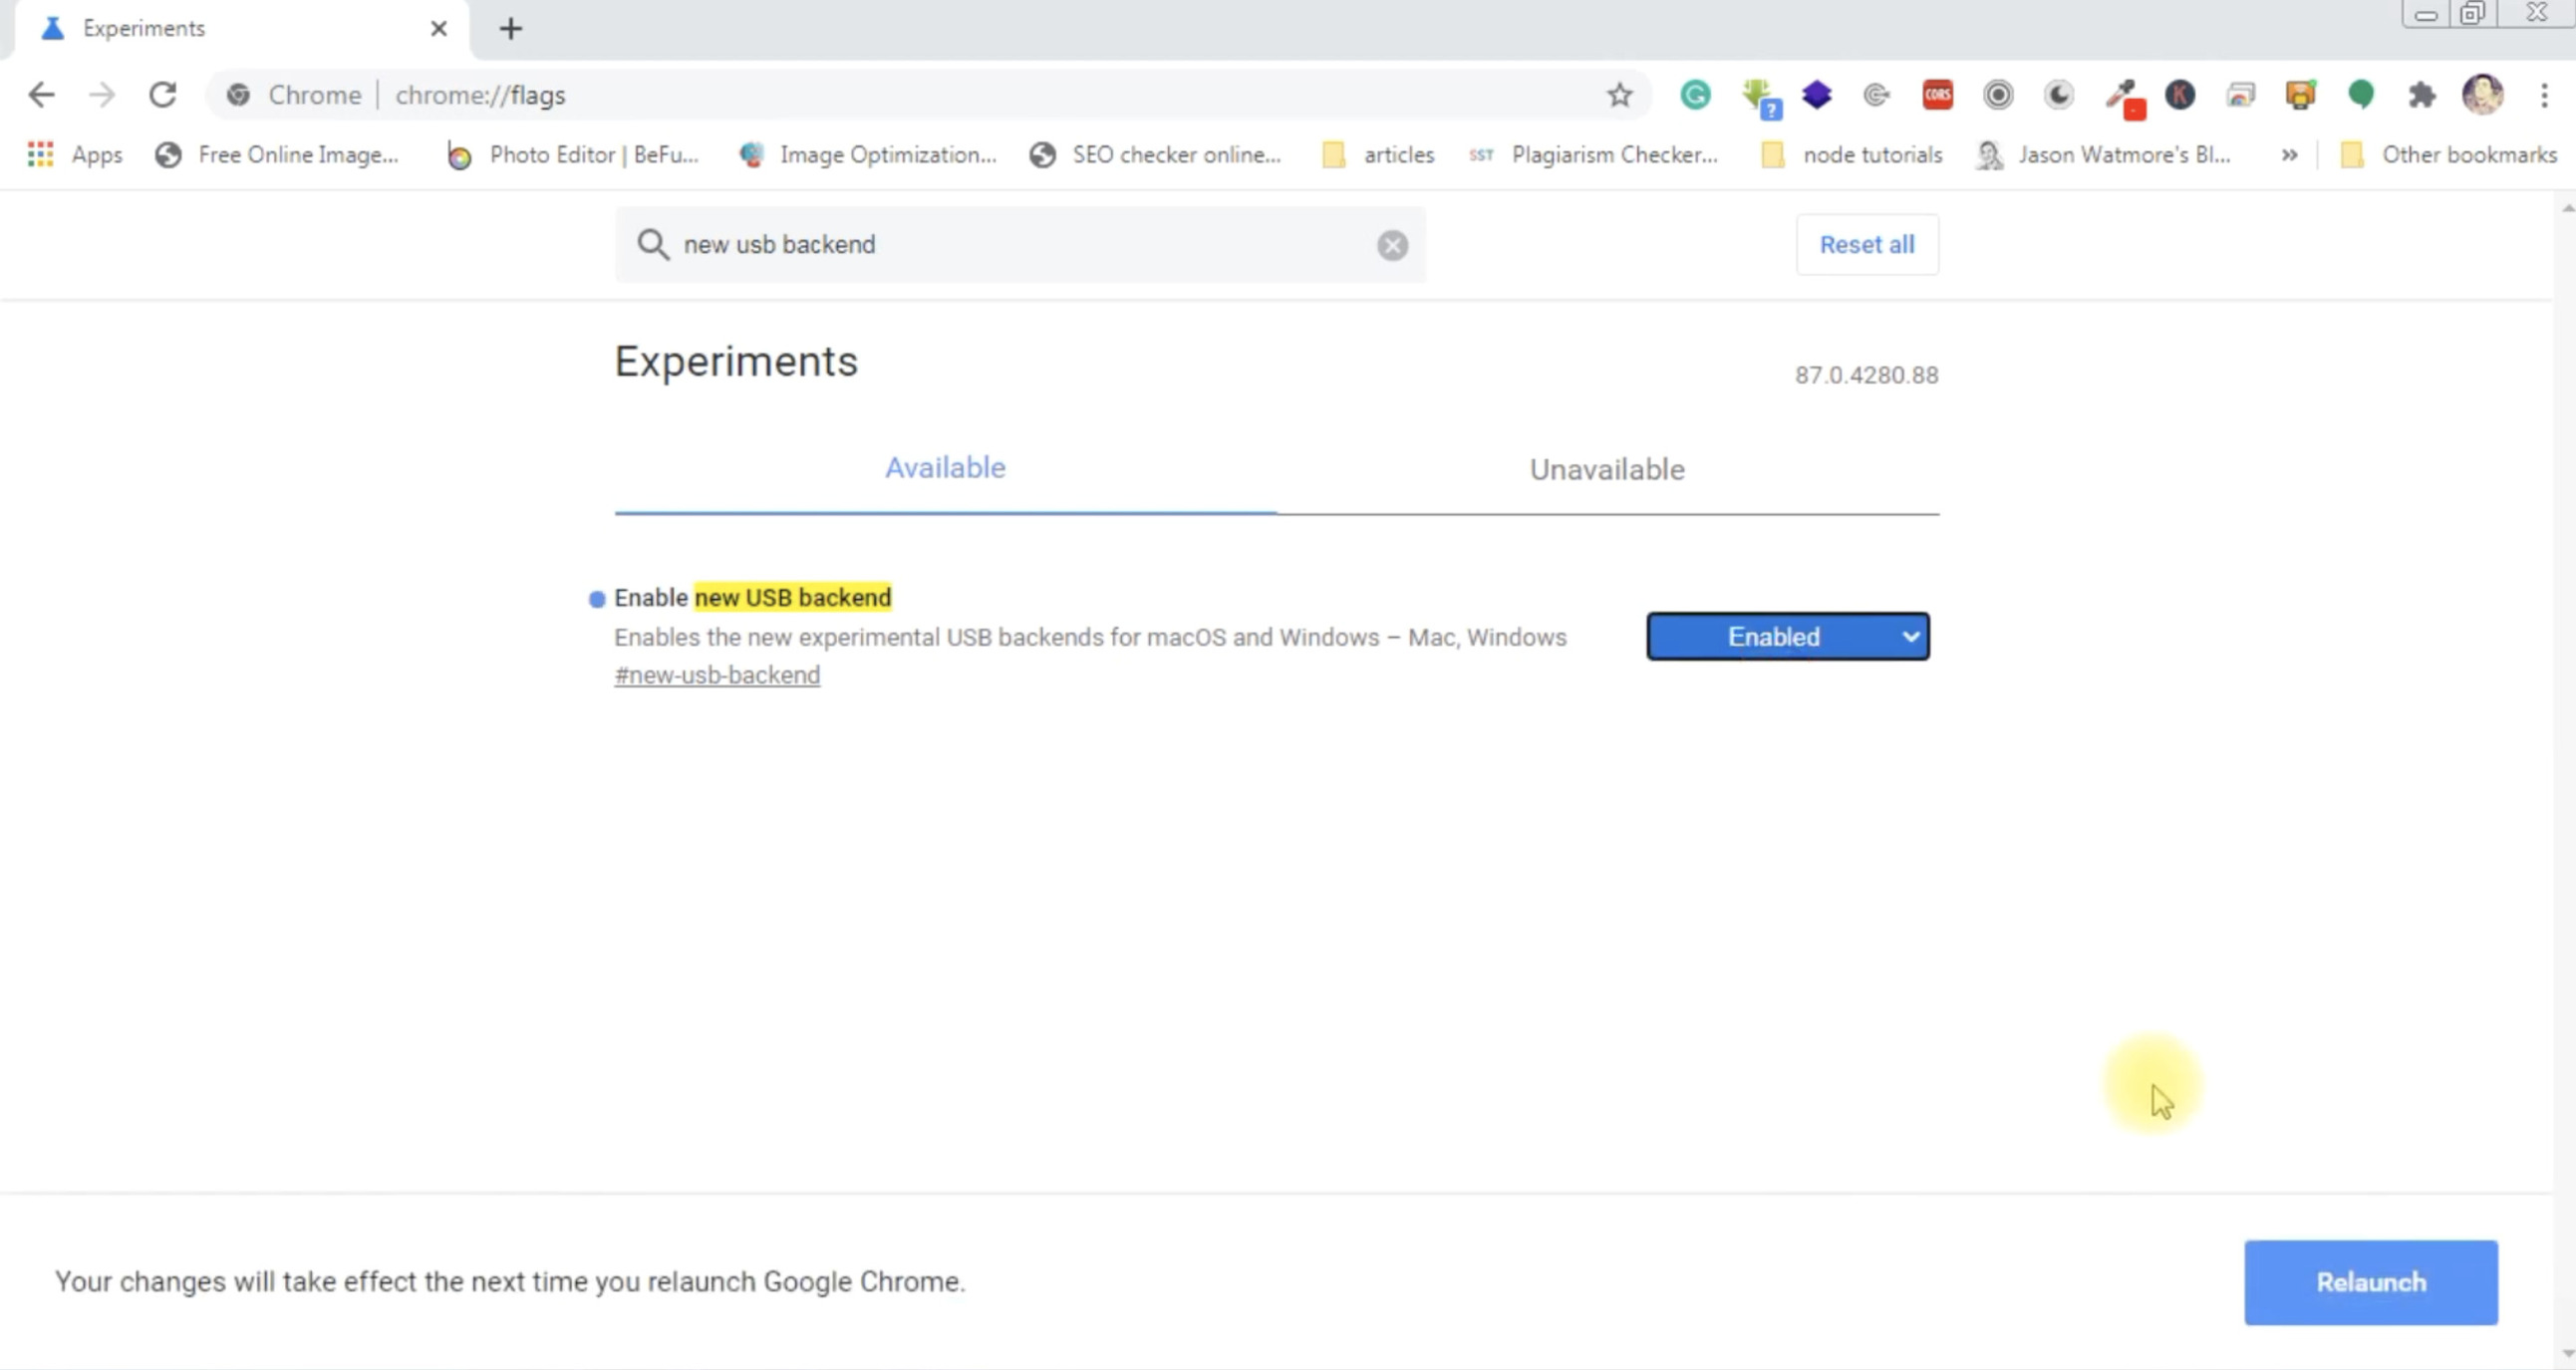 enable usb backend option in chrome